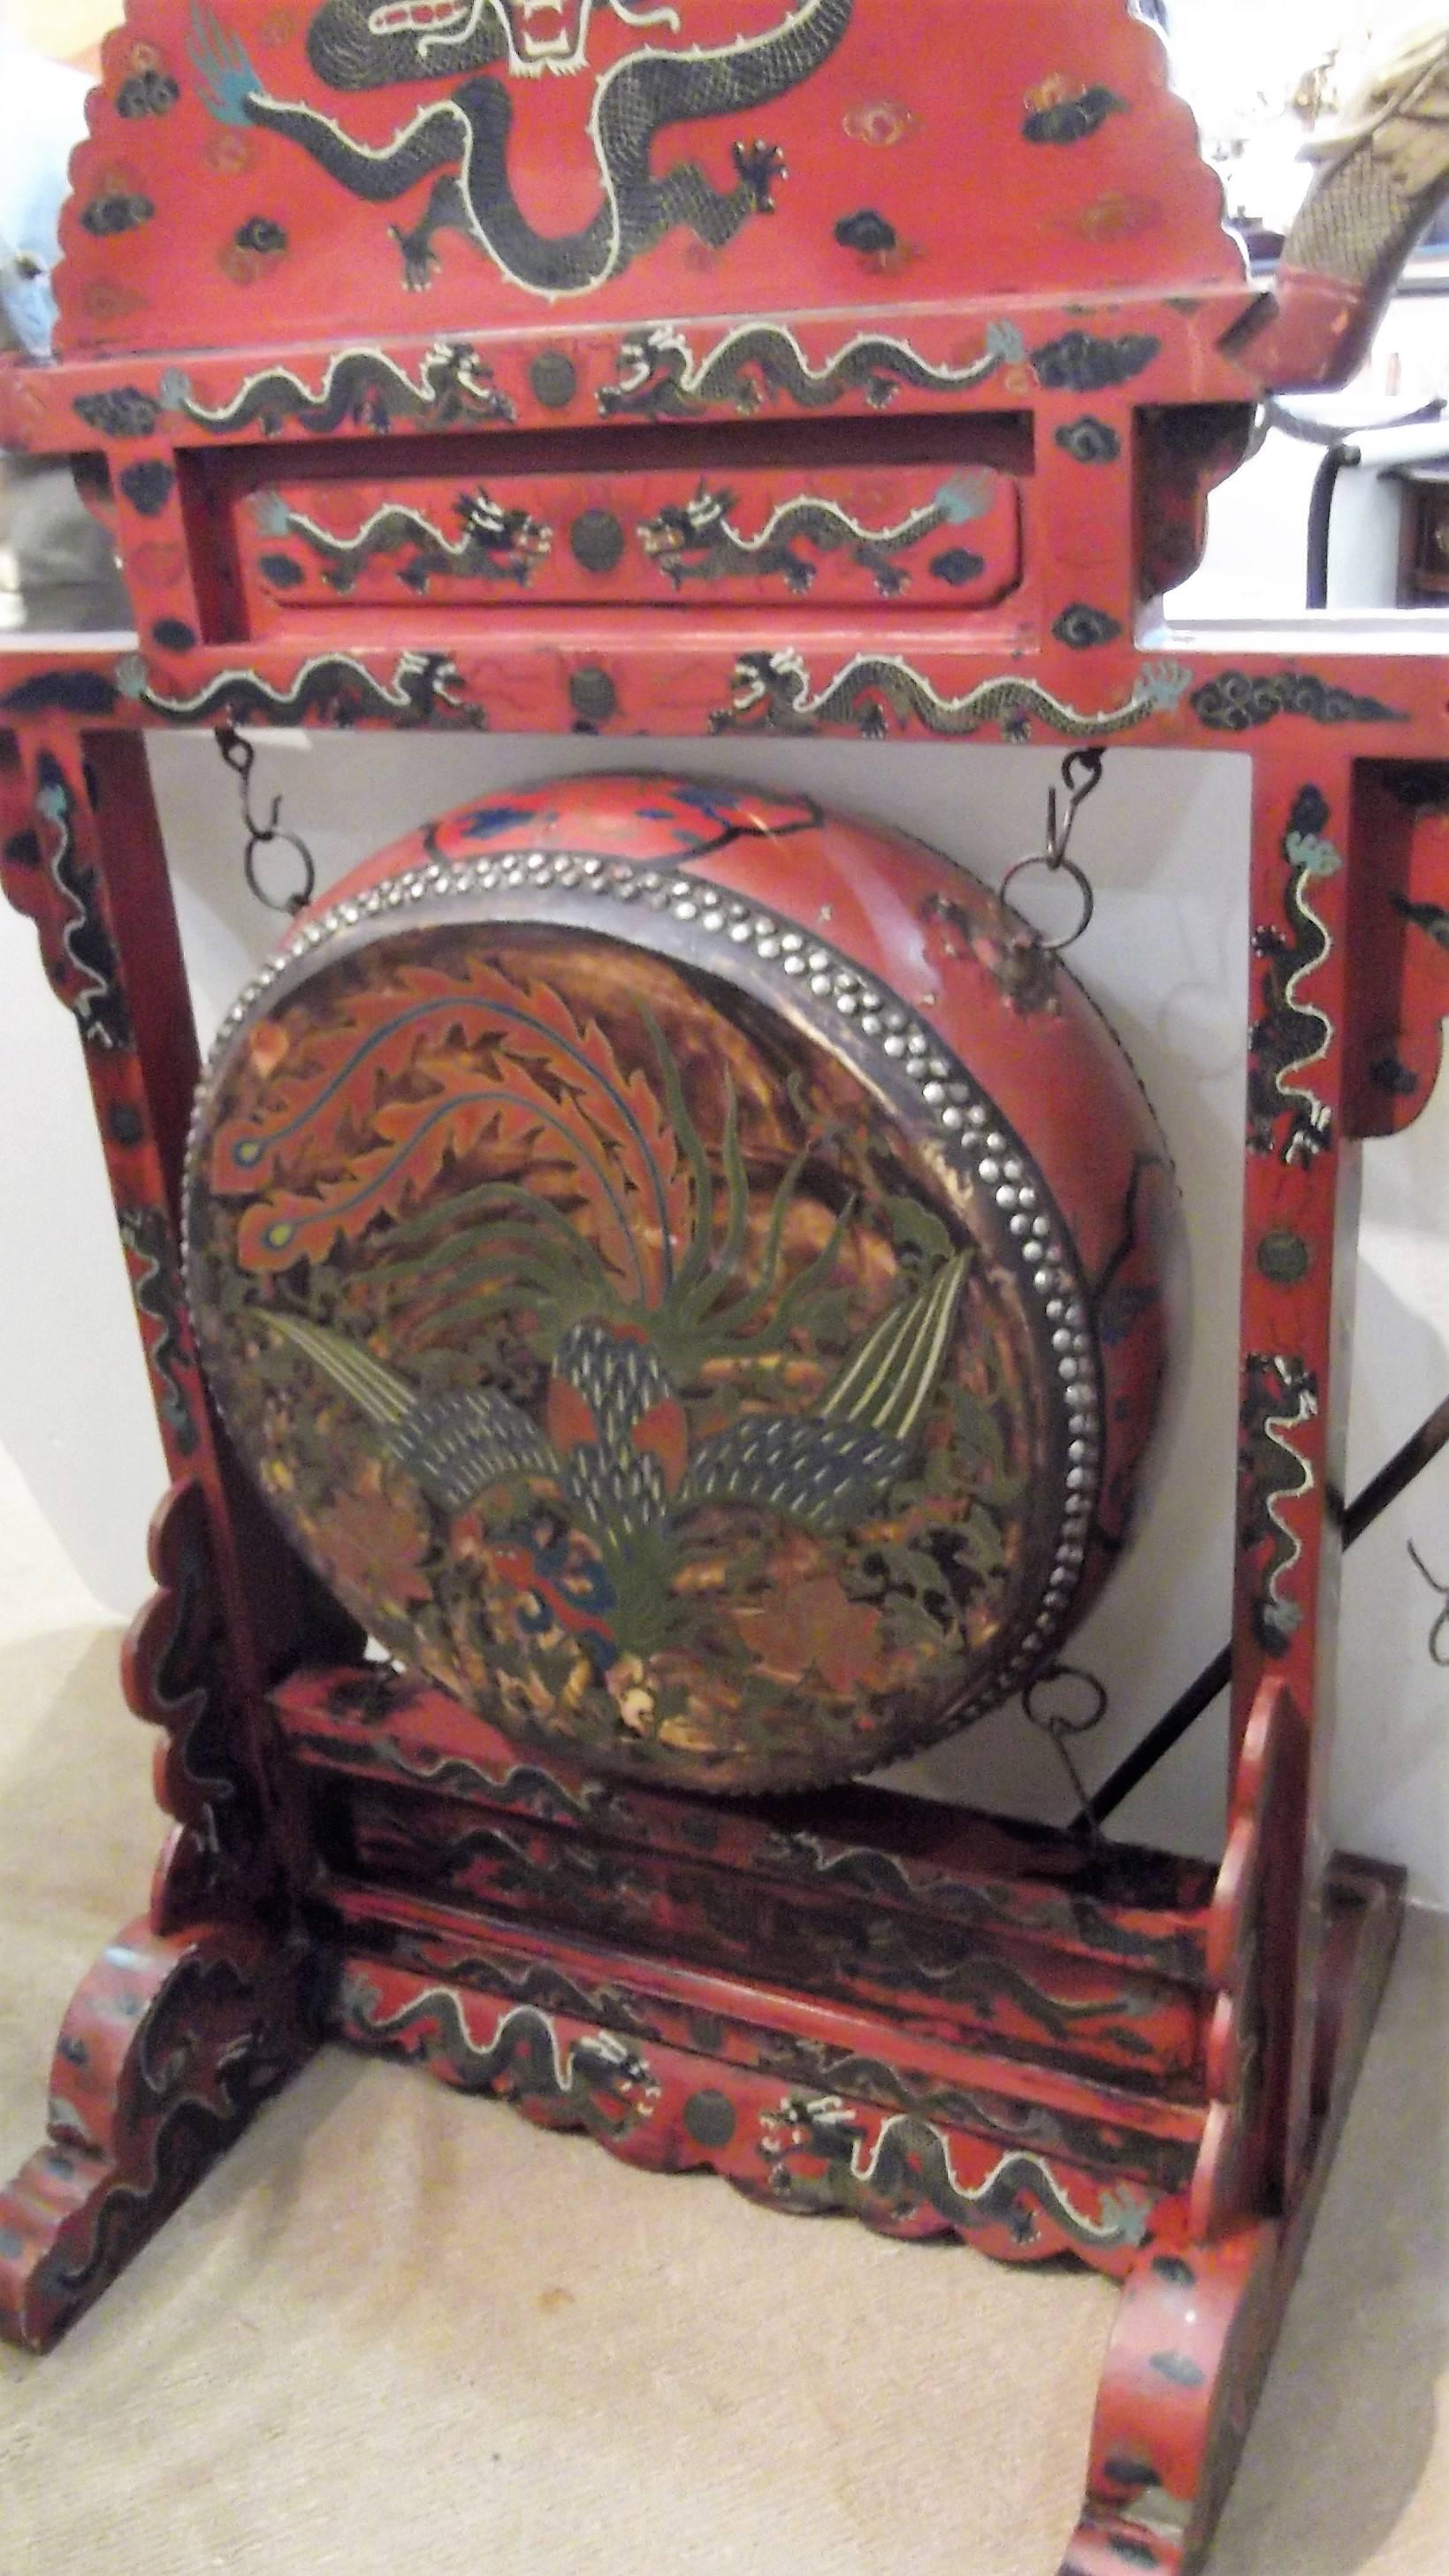 Hand-painted antique Chinese temple gong in very good condition consistent with age. The gong is painted with bird of paradise, dragons and other Chinese design on a red background. Fully decorated on both sides, complete with gong hammer. The drum